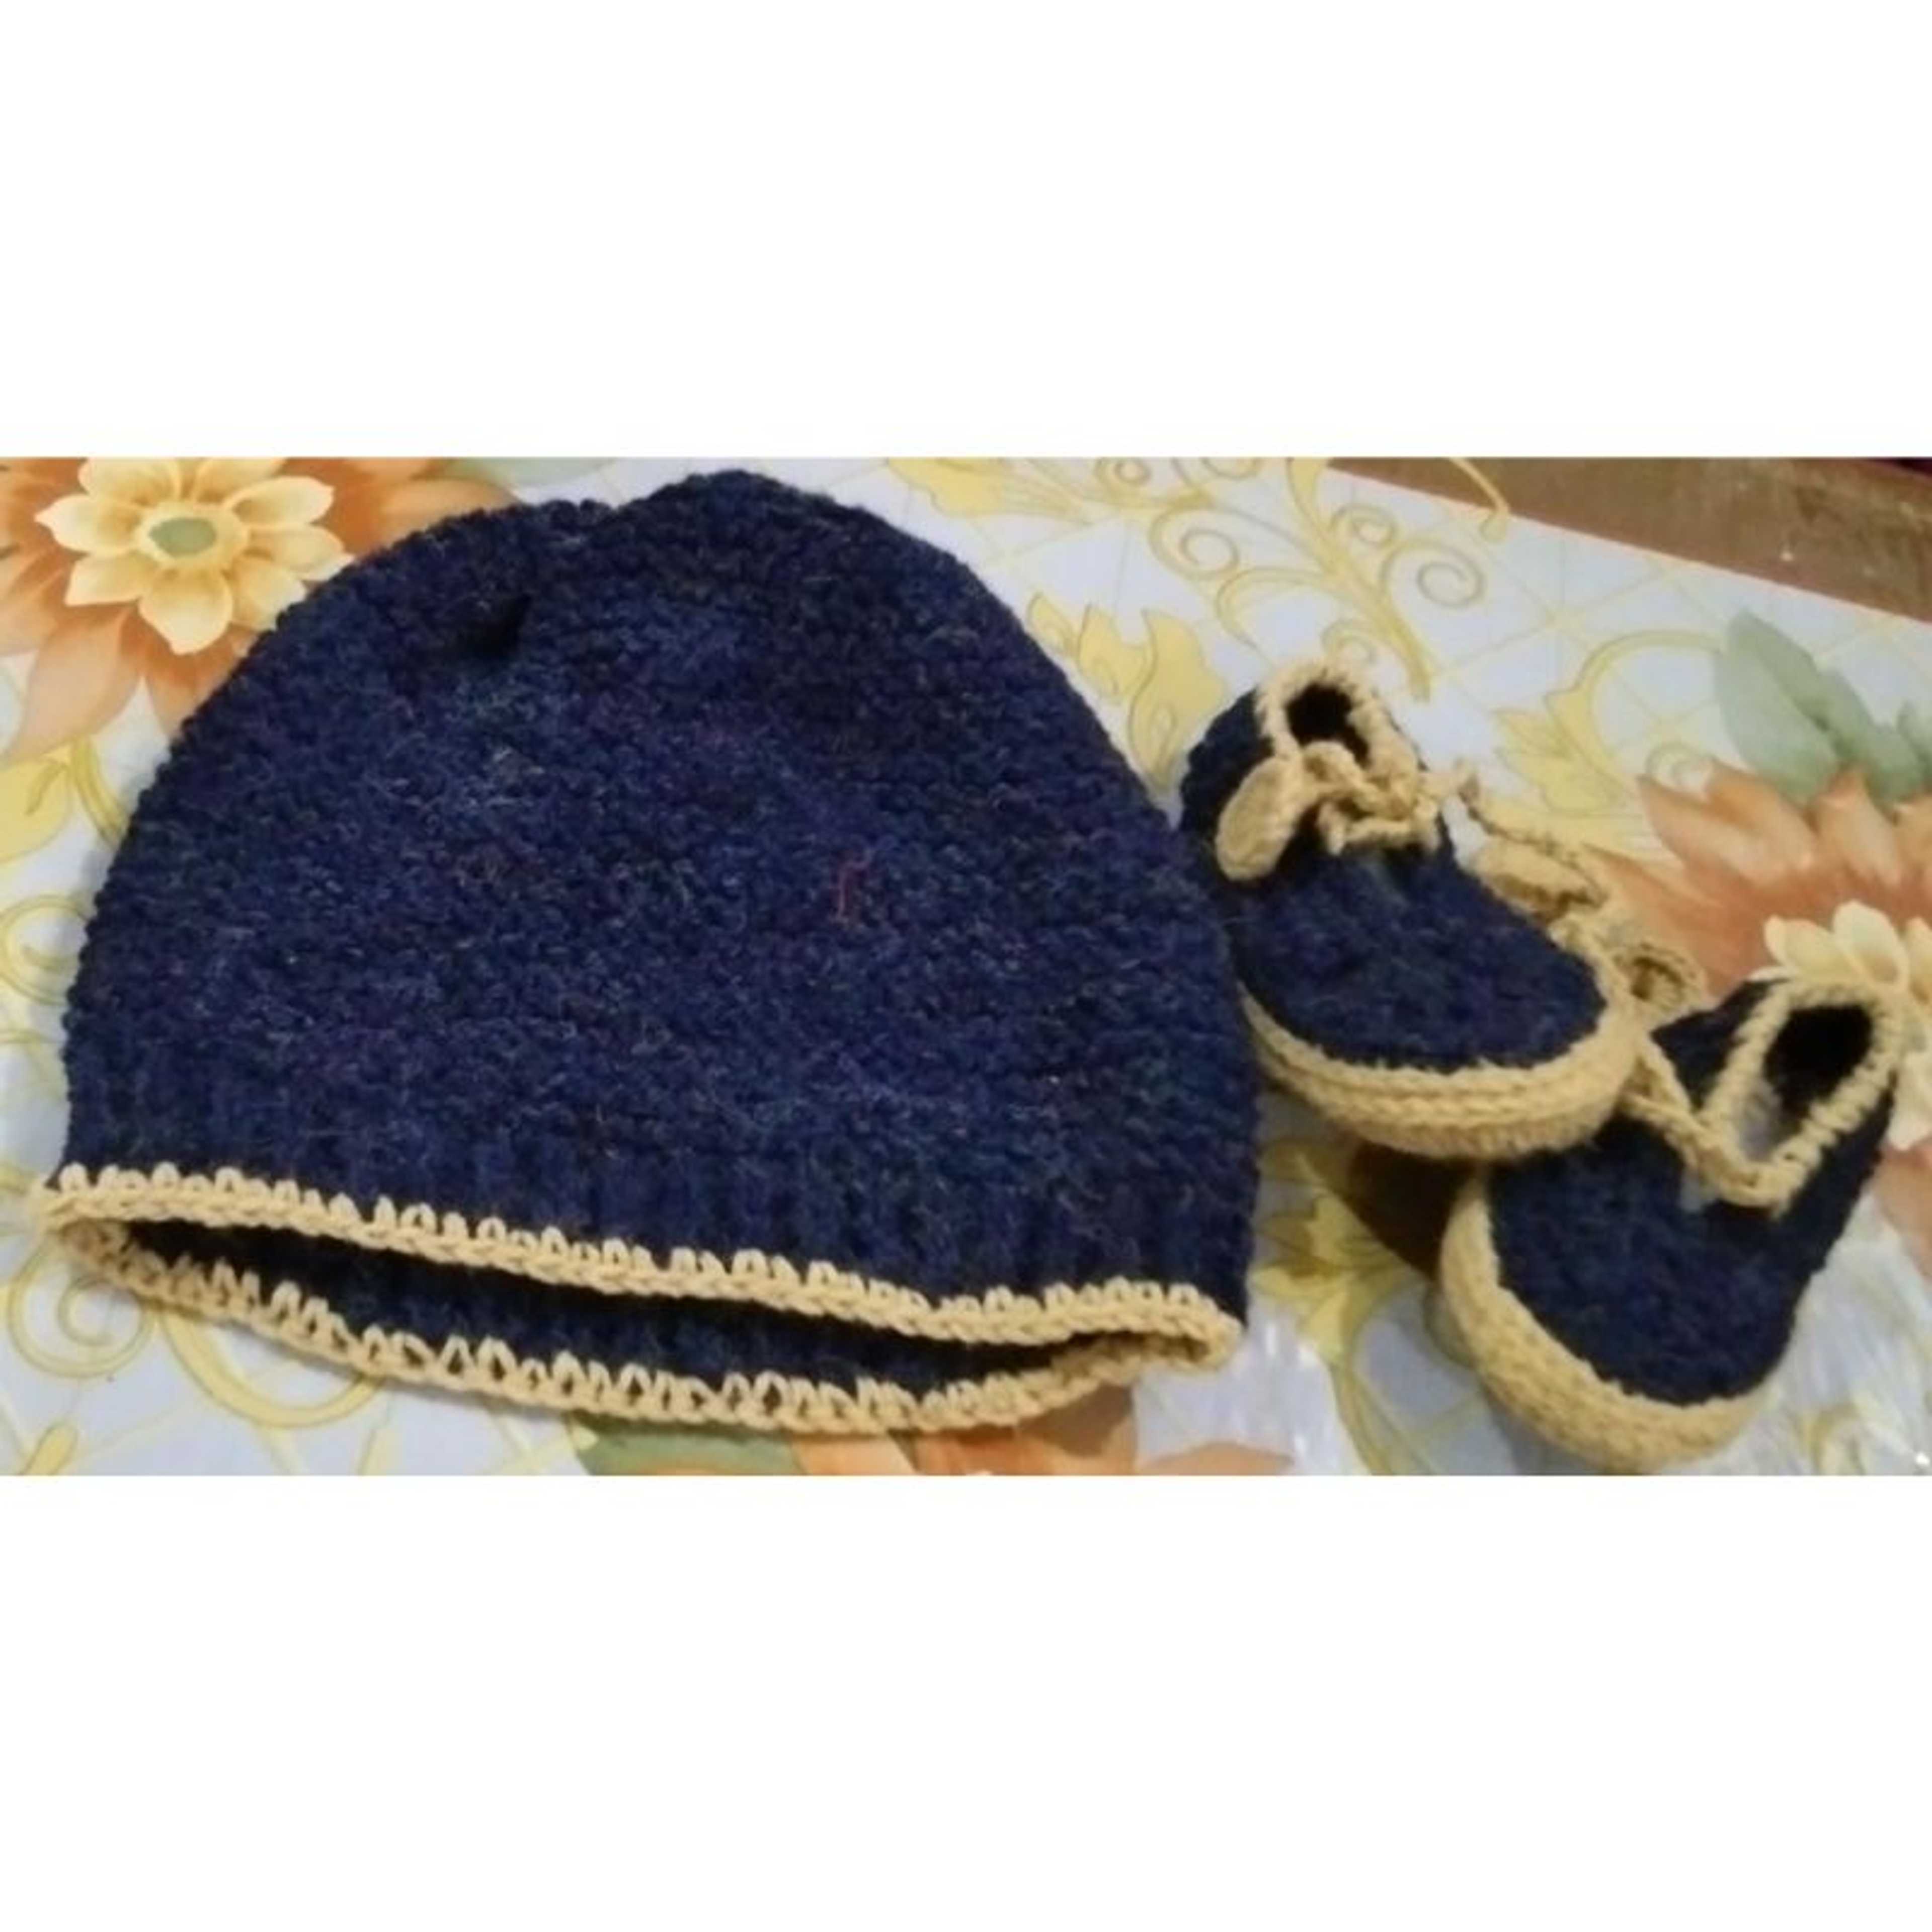 Knitted Cap and Shoes Set for Babies - Blue Color